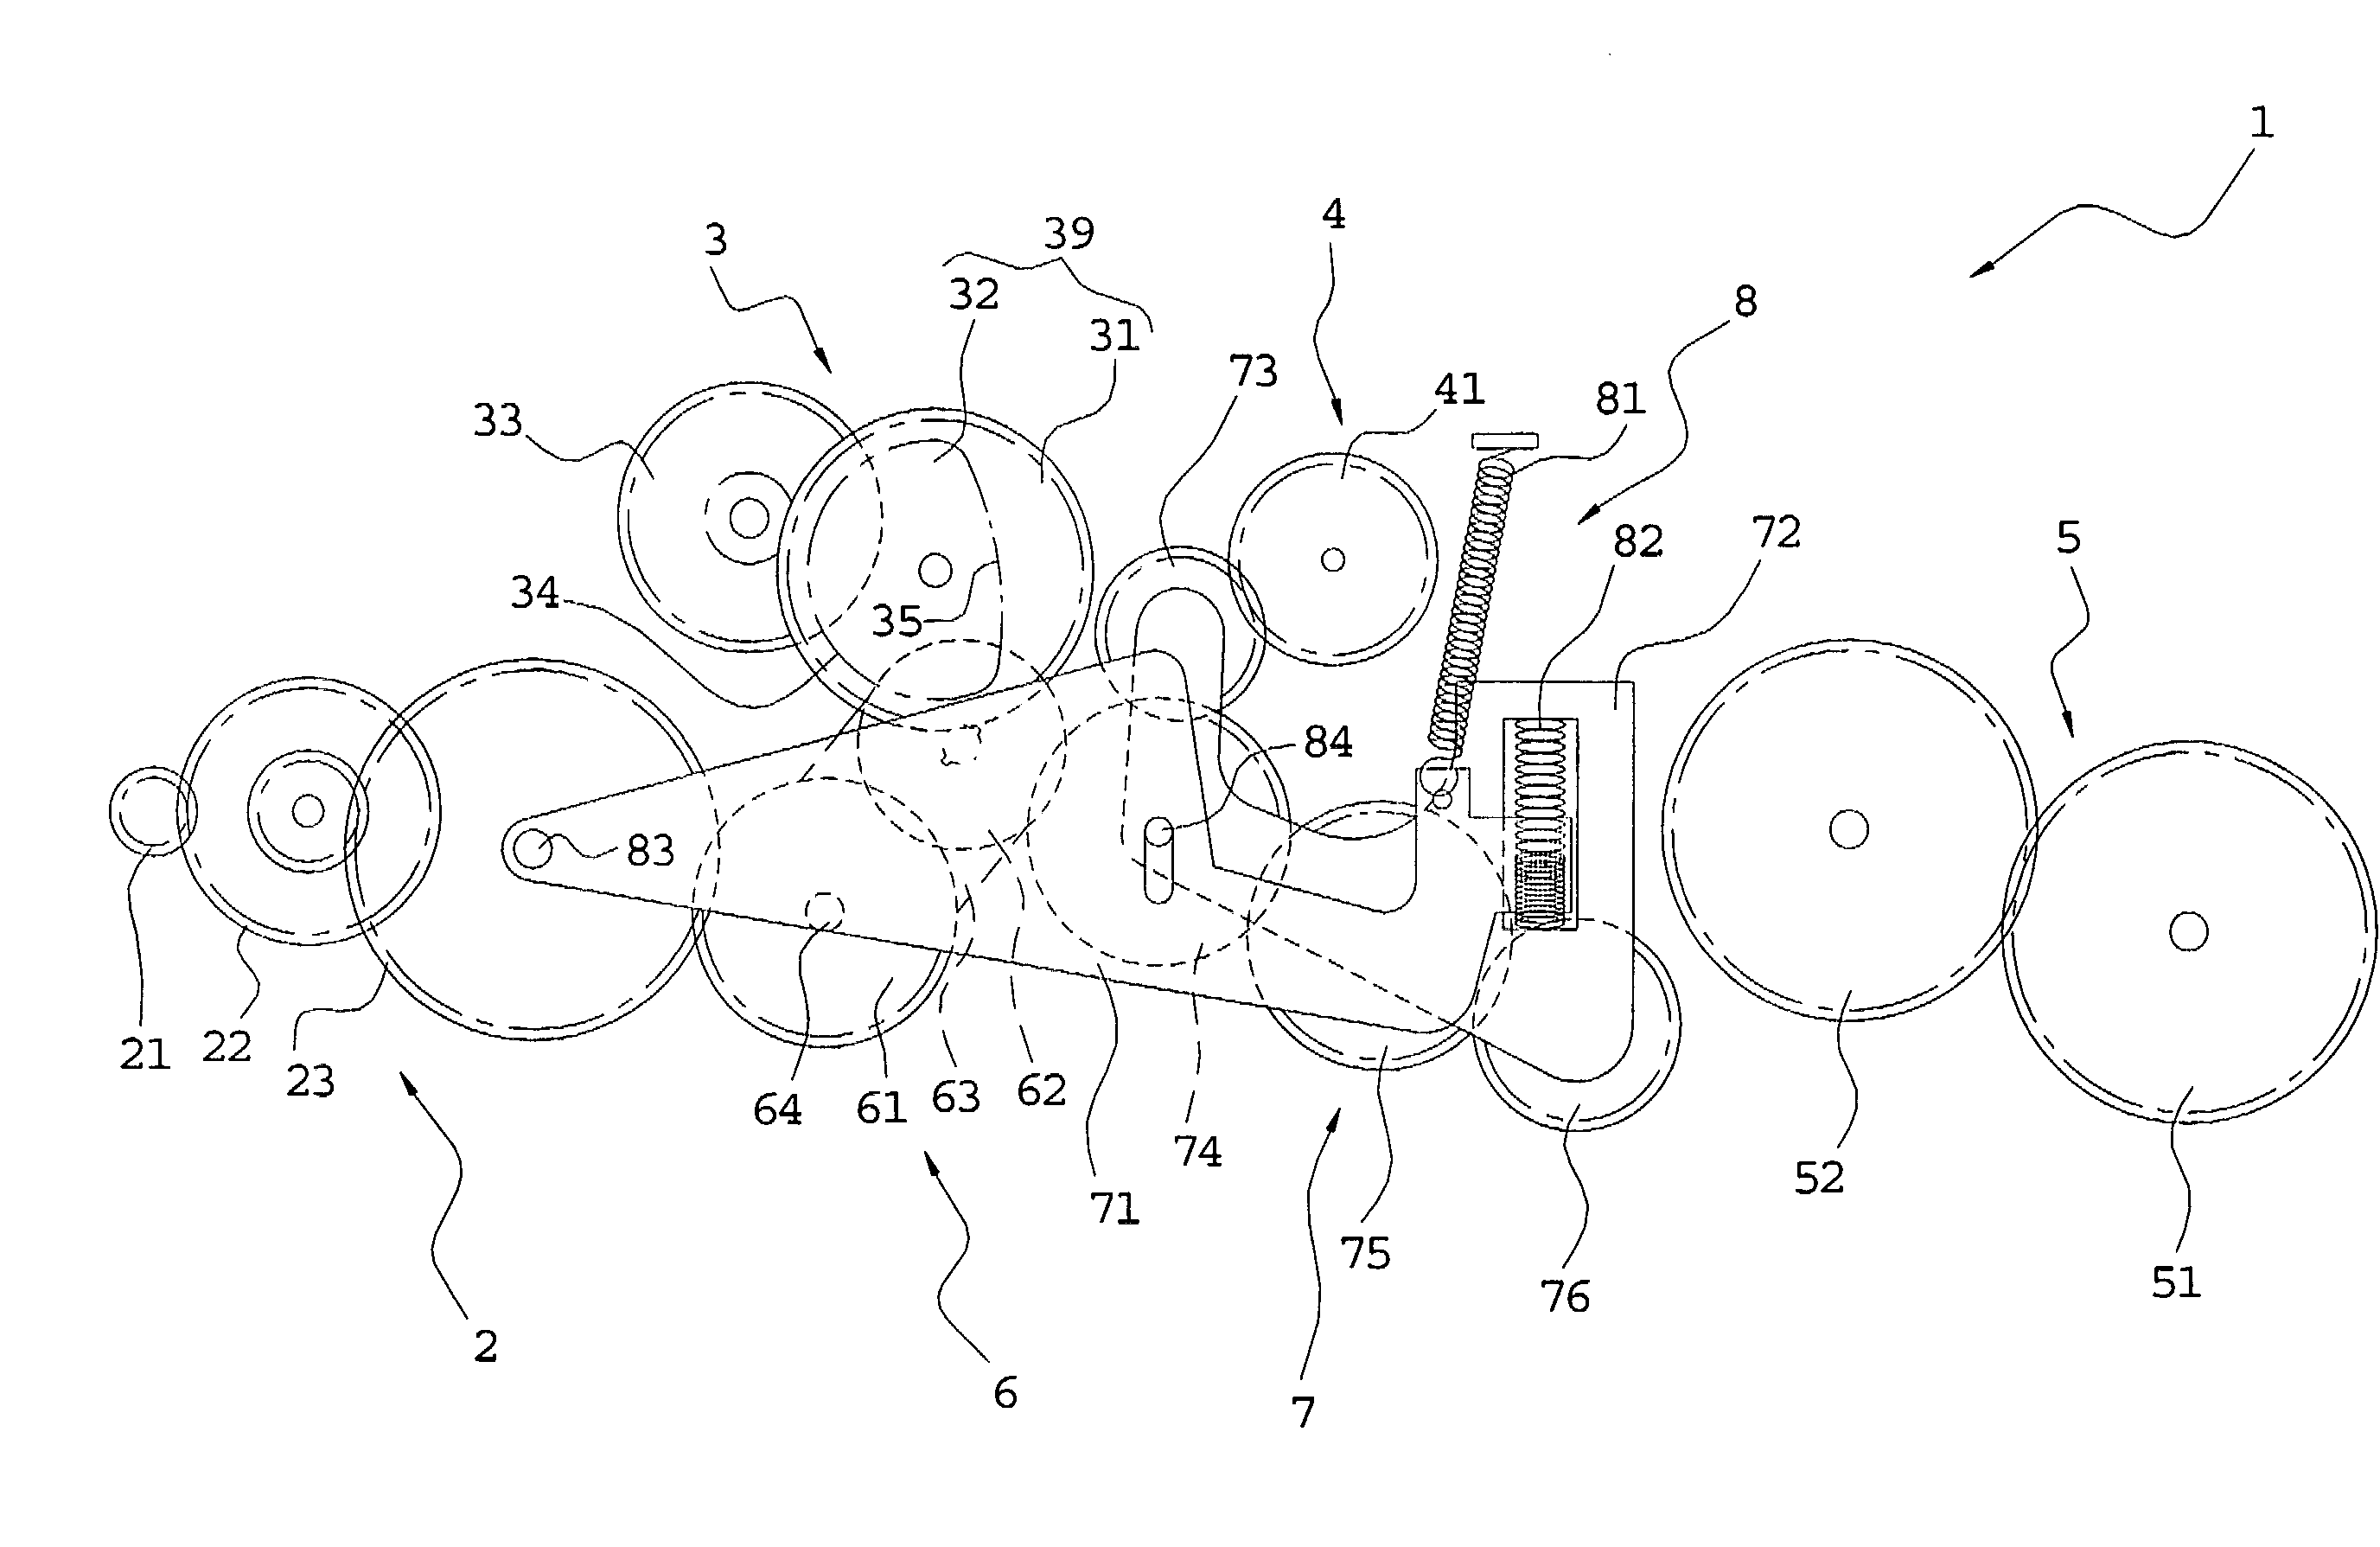 Control system for driving a motor to perform a plurality of actions